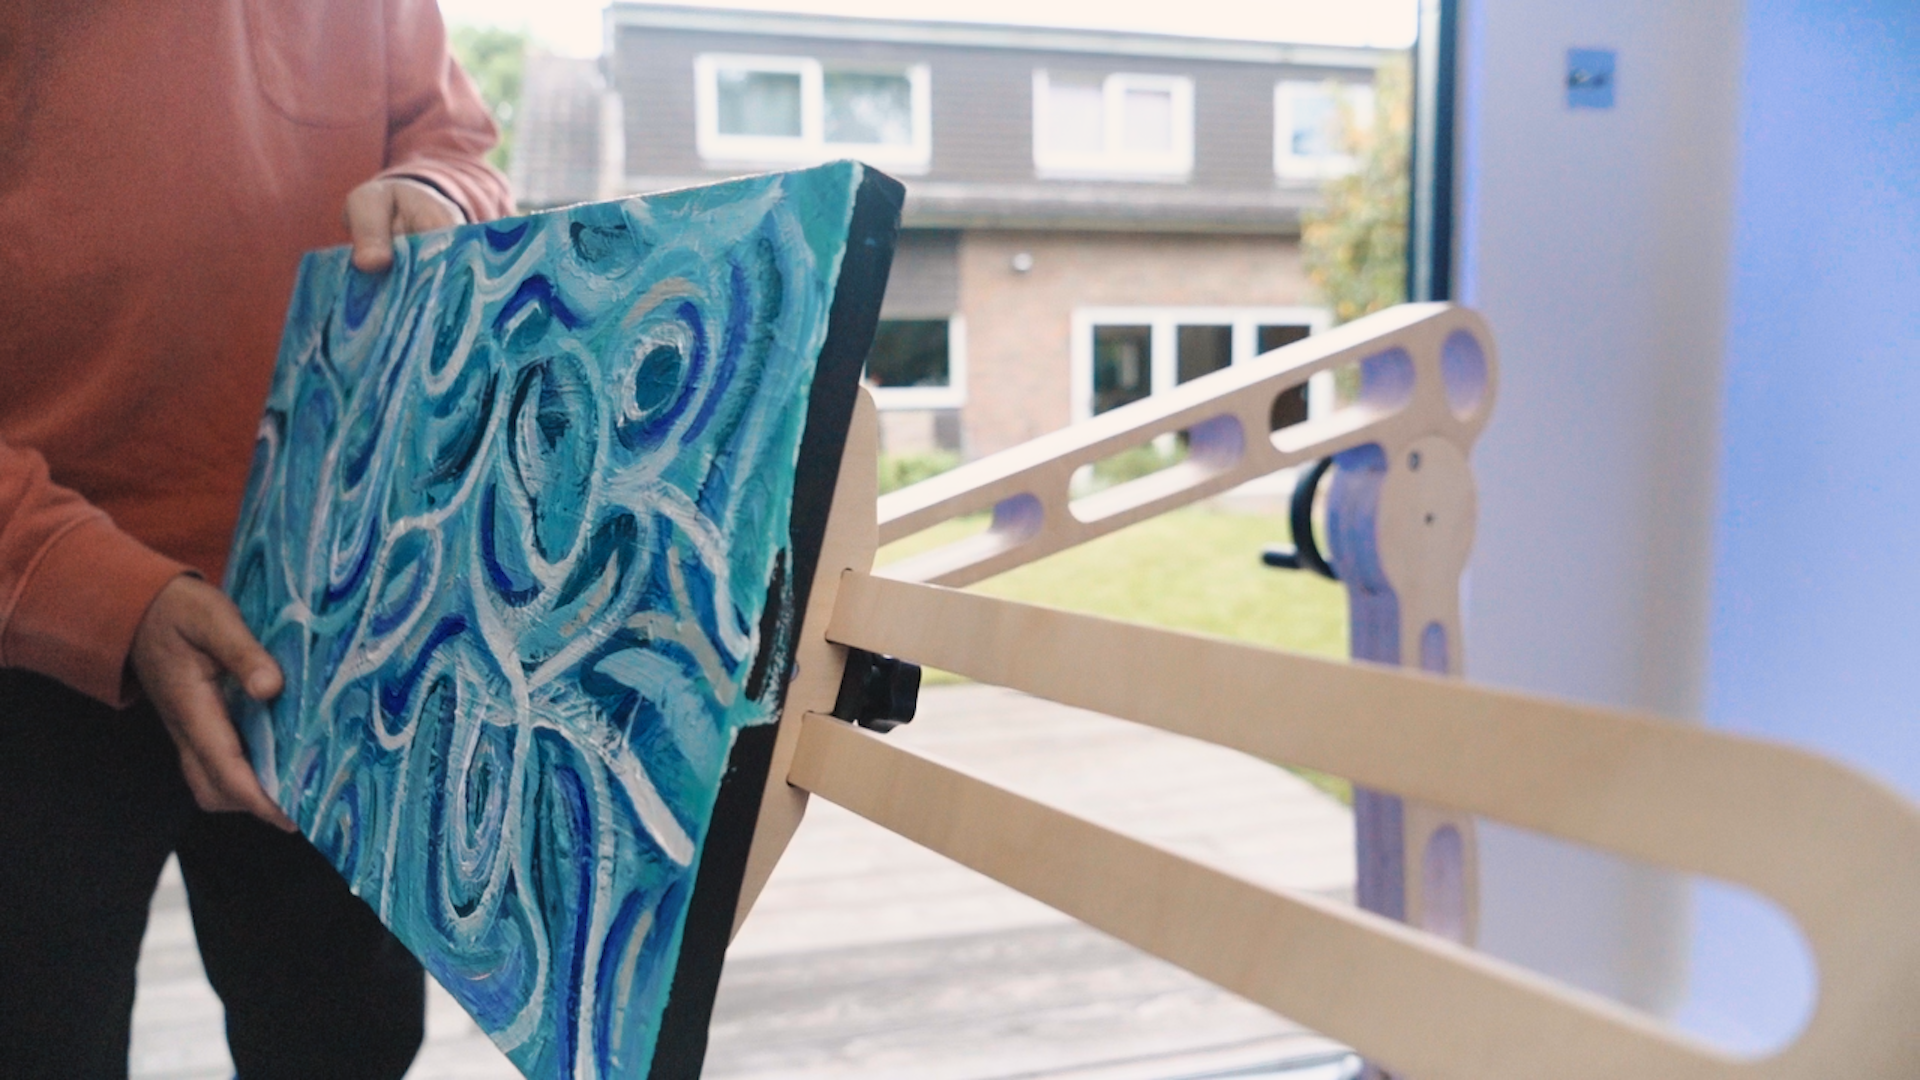 A parsons hands hold a canvas painted with swirls of blue in all shades. The canvas is fixed to a Freasel accessible easel.